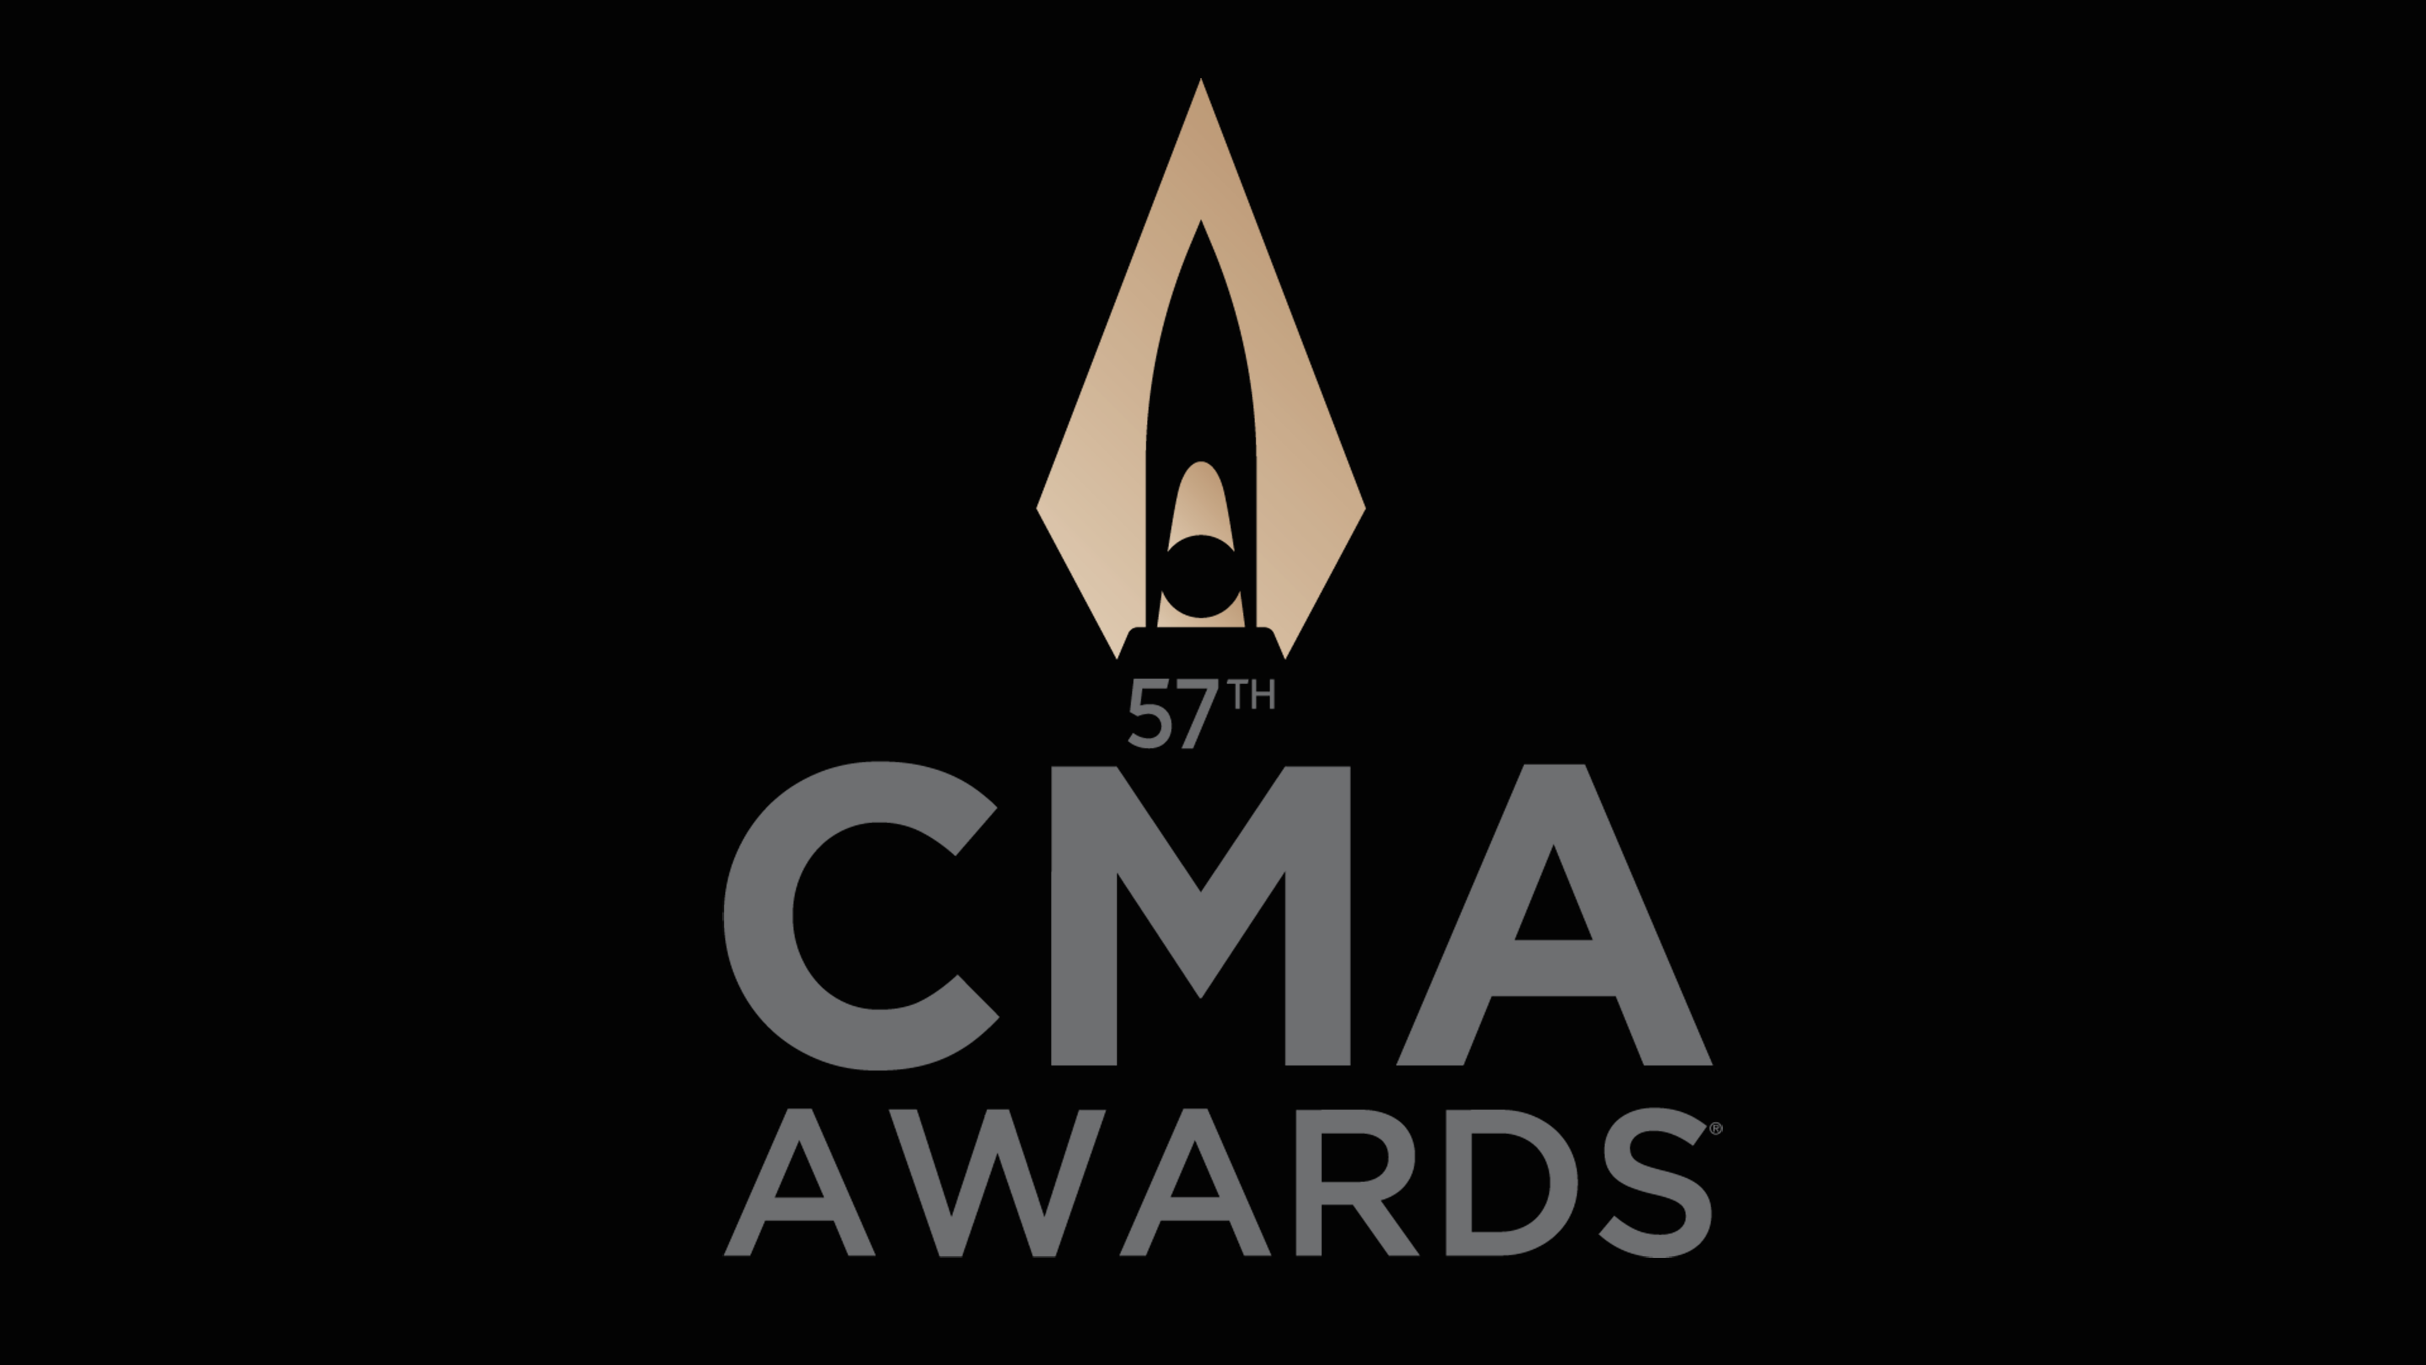 57th Annual CMA Awards in Nashville promo photo for American Express Cardmember presale offer code